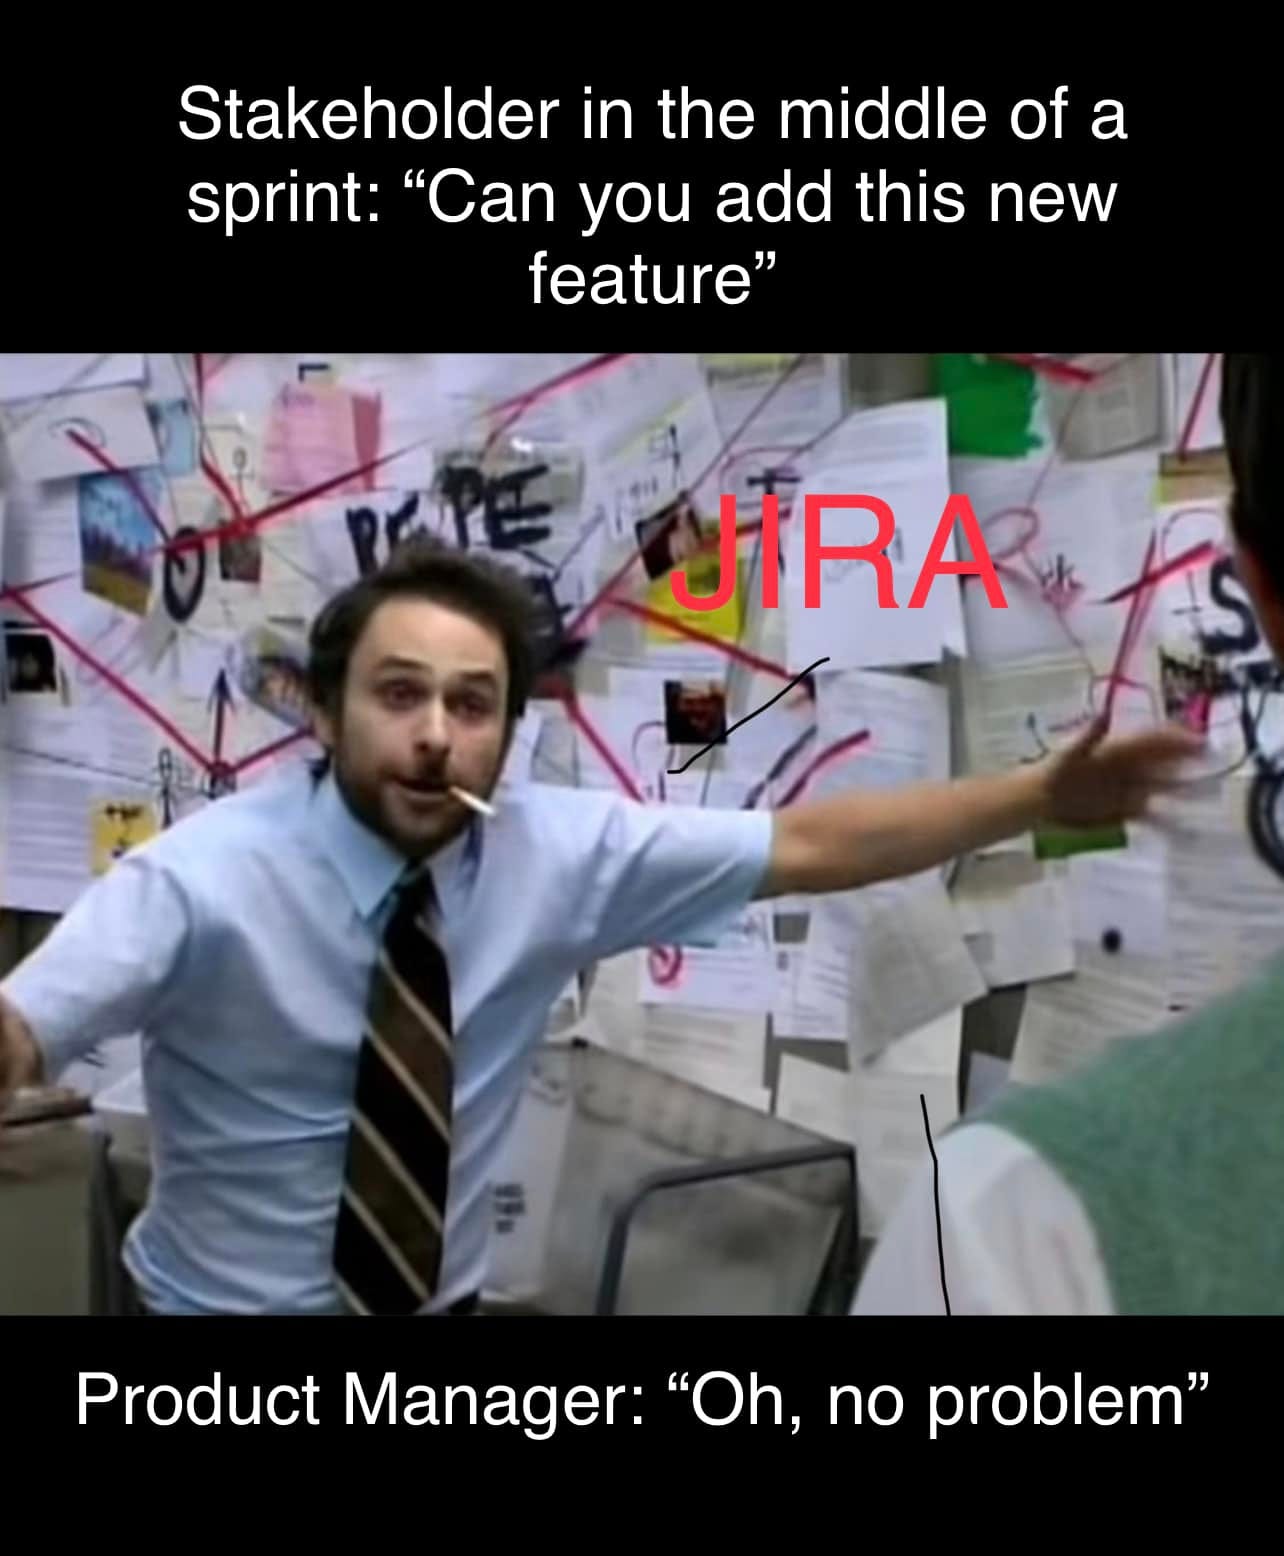 May be an image of 1 person and text that says 'Stakeholder in the middle of a sprint: "Can you add this new feature" JIRA Product Manager: "Oh, no problem"'